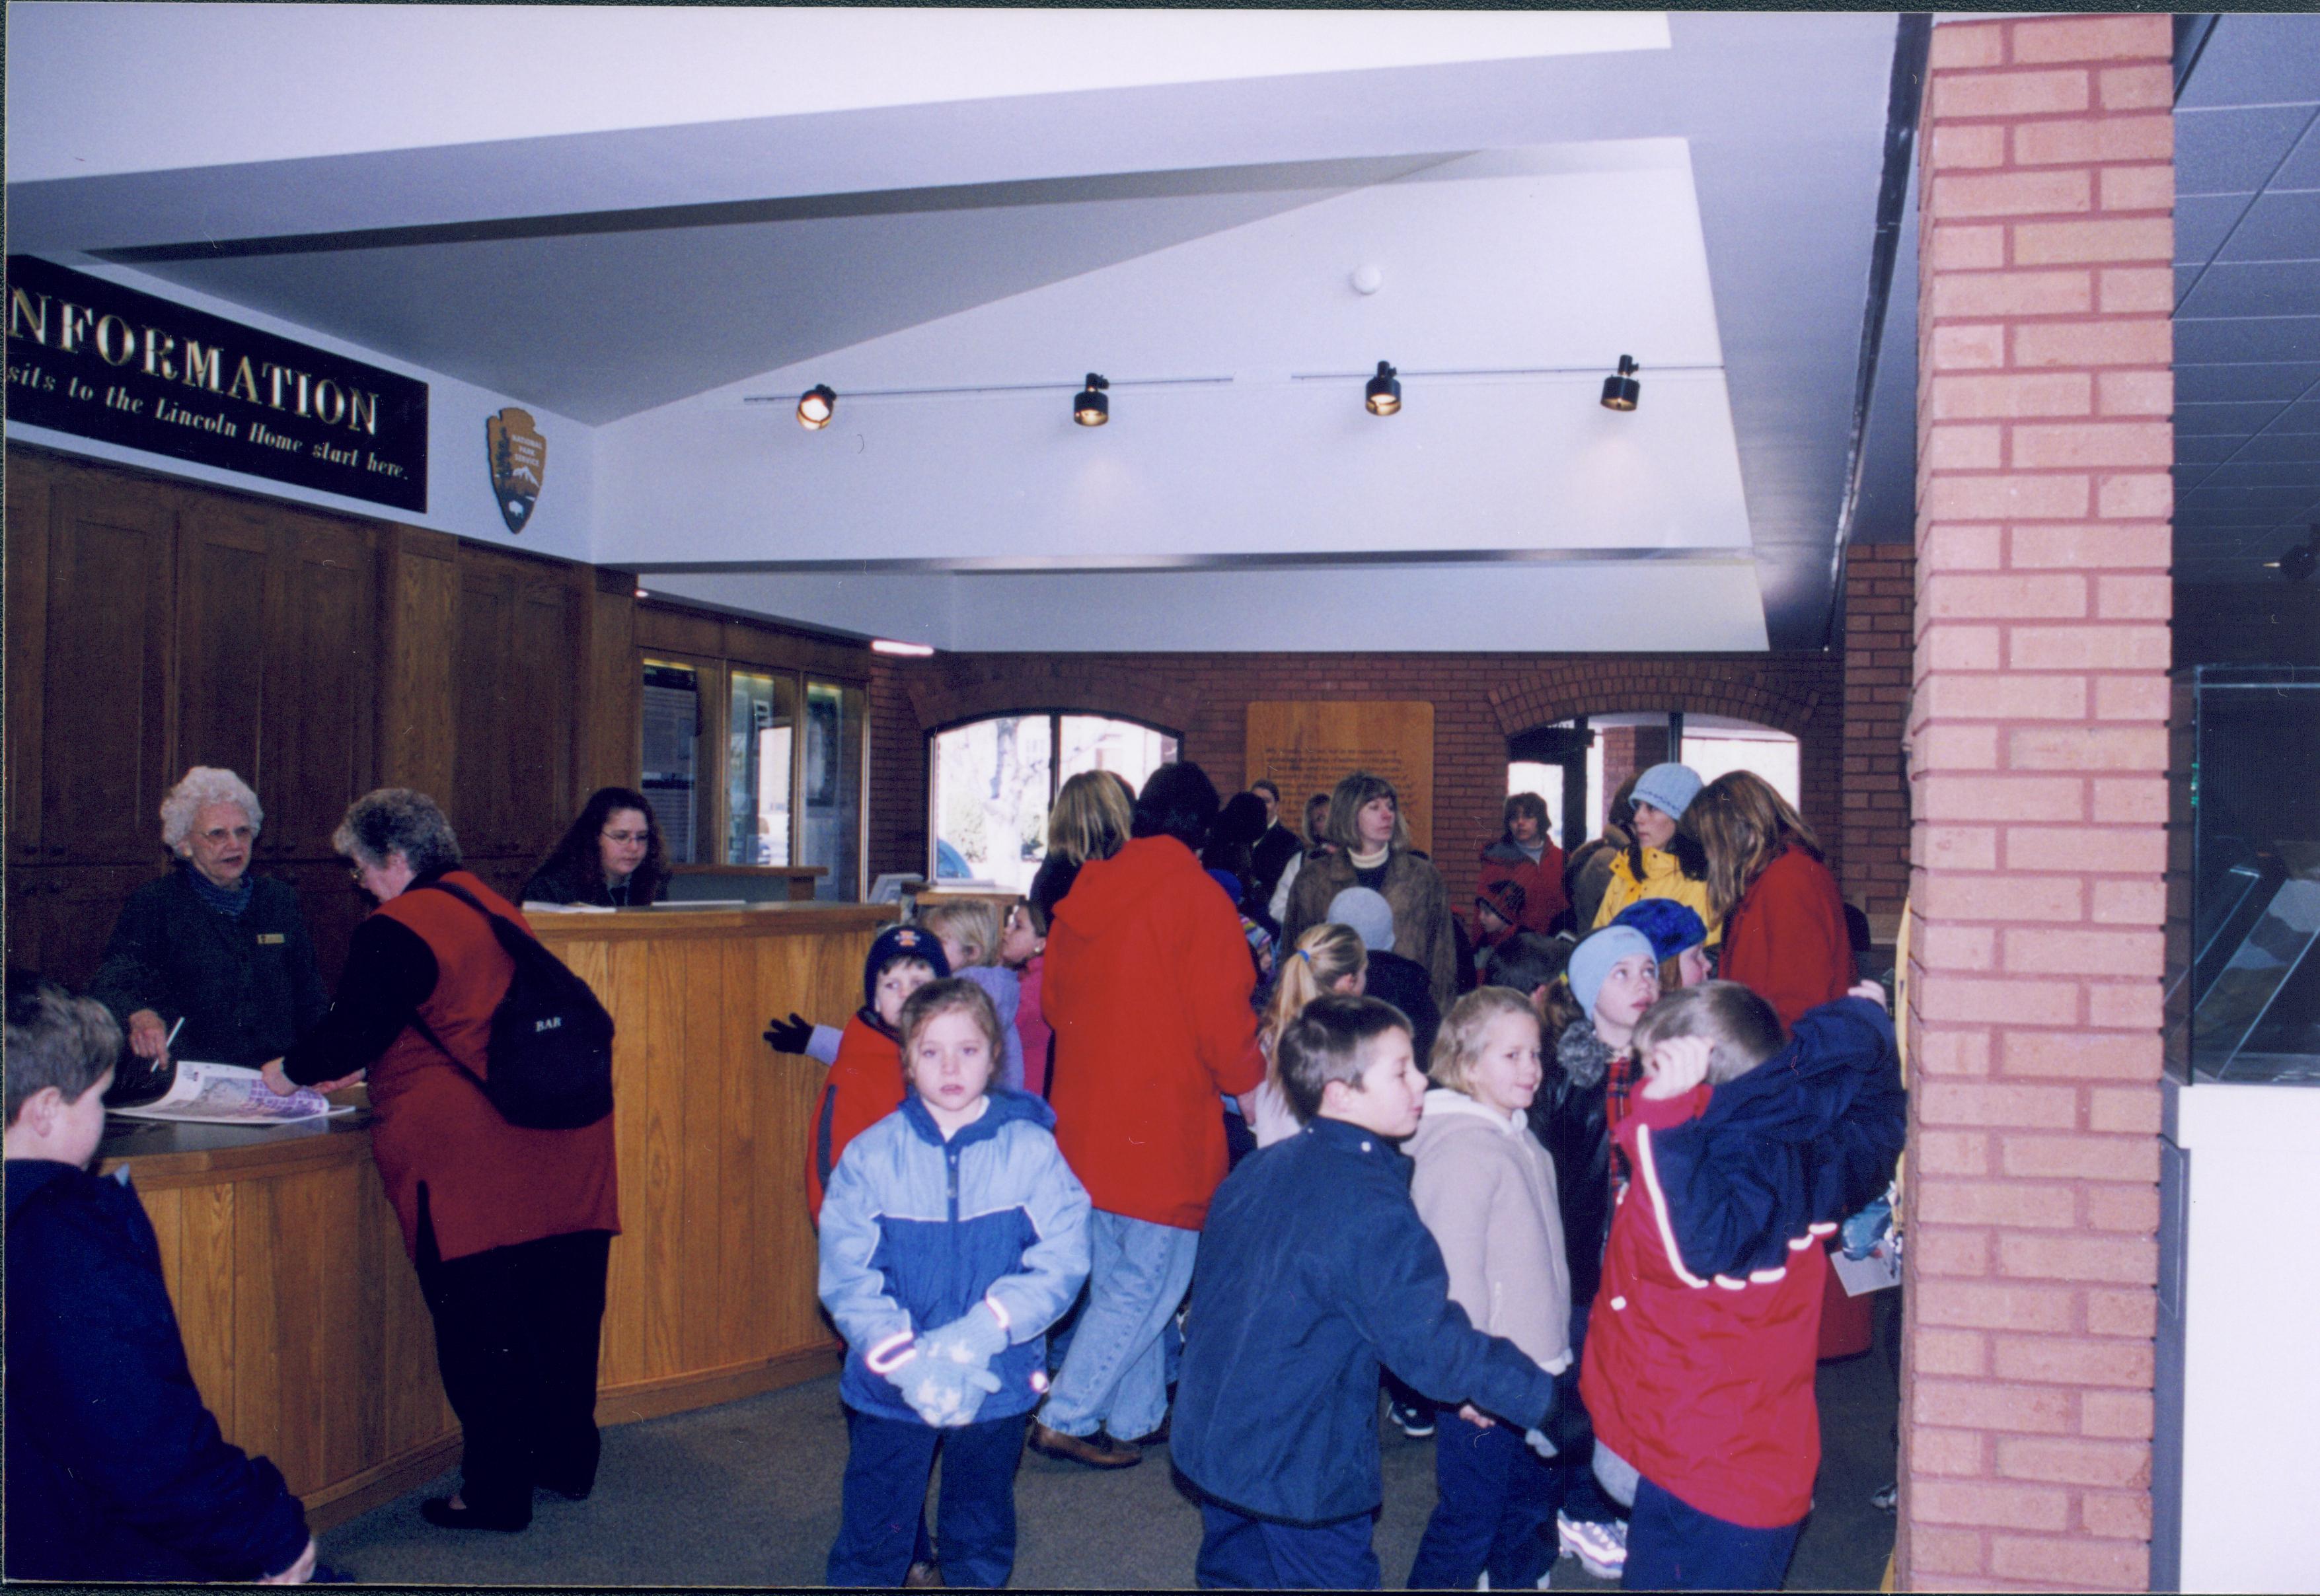 Lincoln's Birthday - School group visiting site during activities. Volunteer ? assists lady in red coat. Ranger Christy Lindberg works behind the desk.   Looking Northwest from main area Lincoln's Birthday, Visitor Center, school group, staff, volunteers, visitors